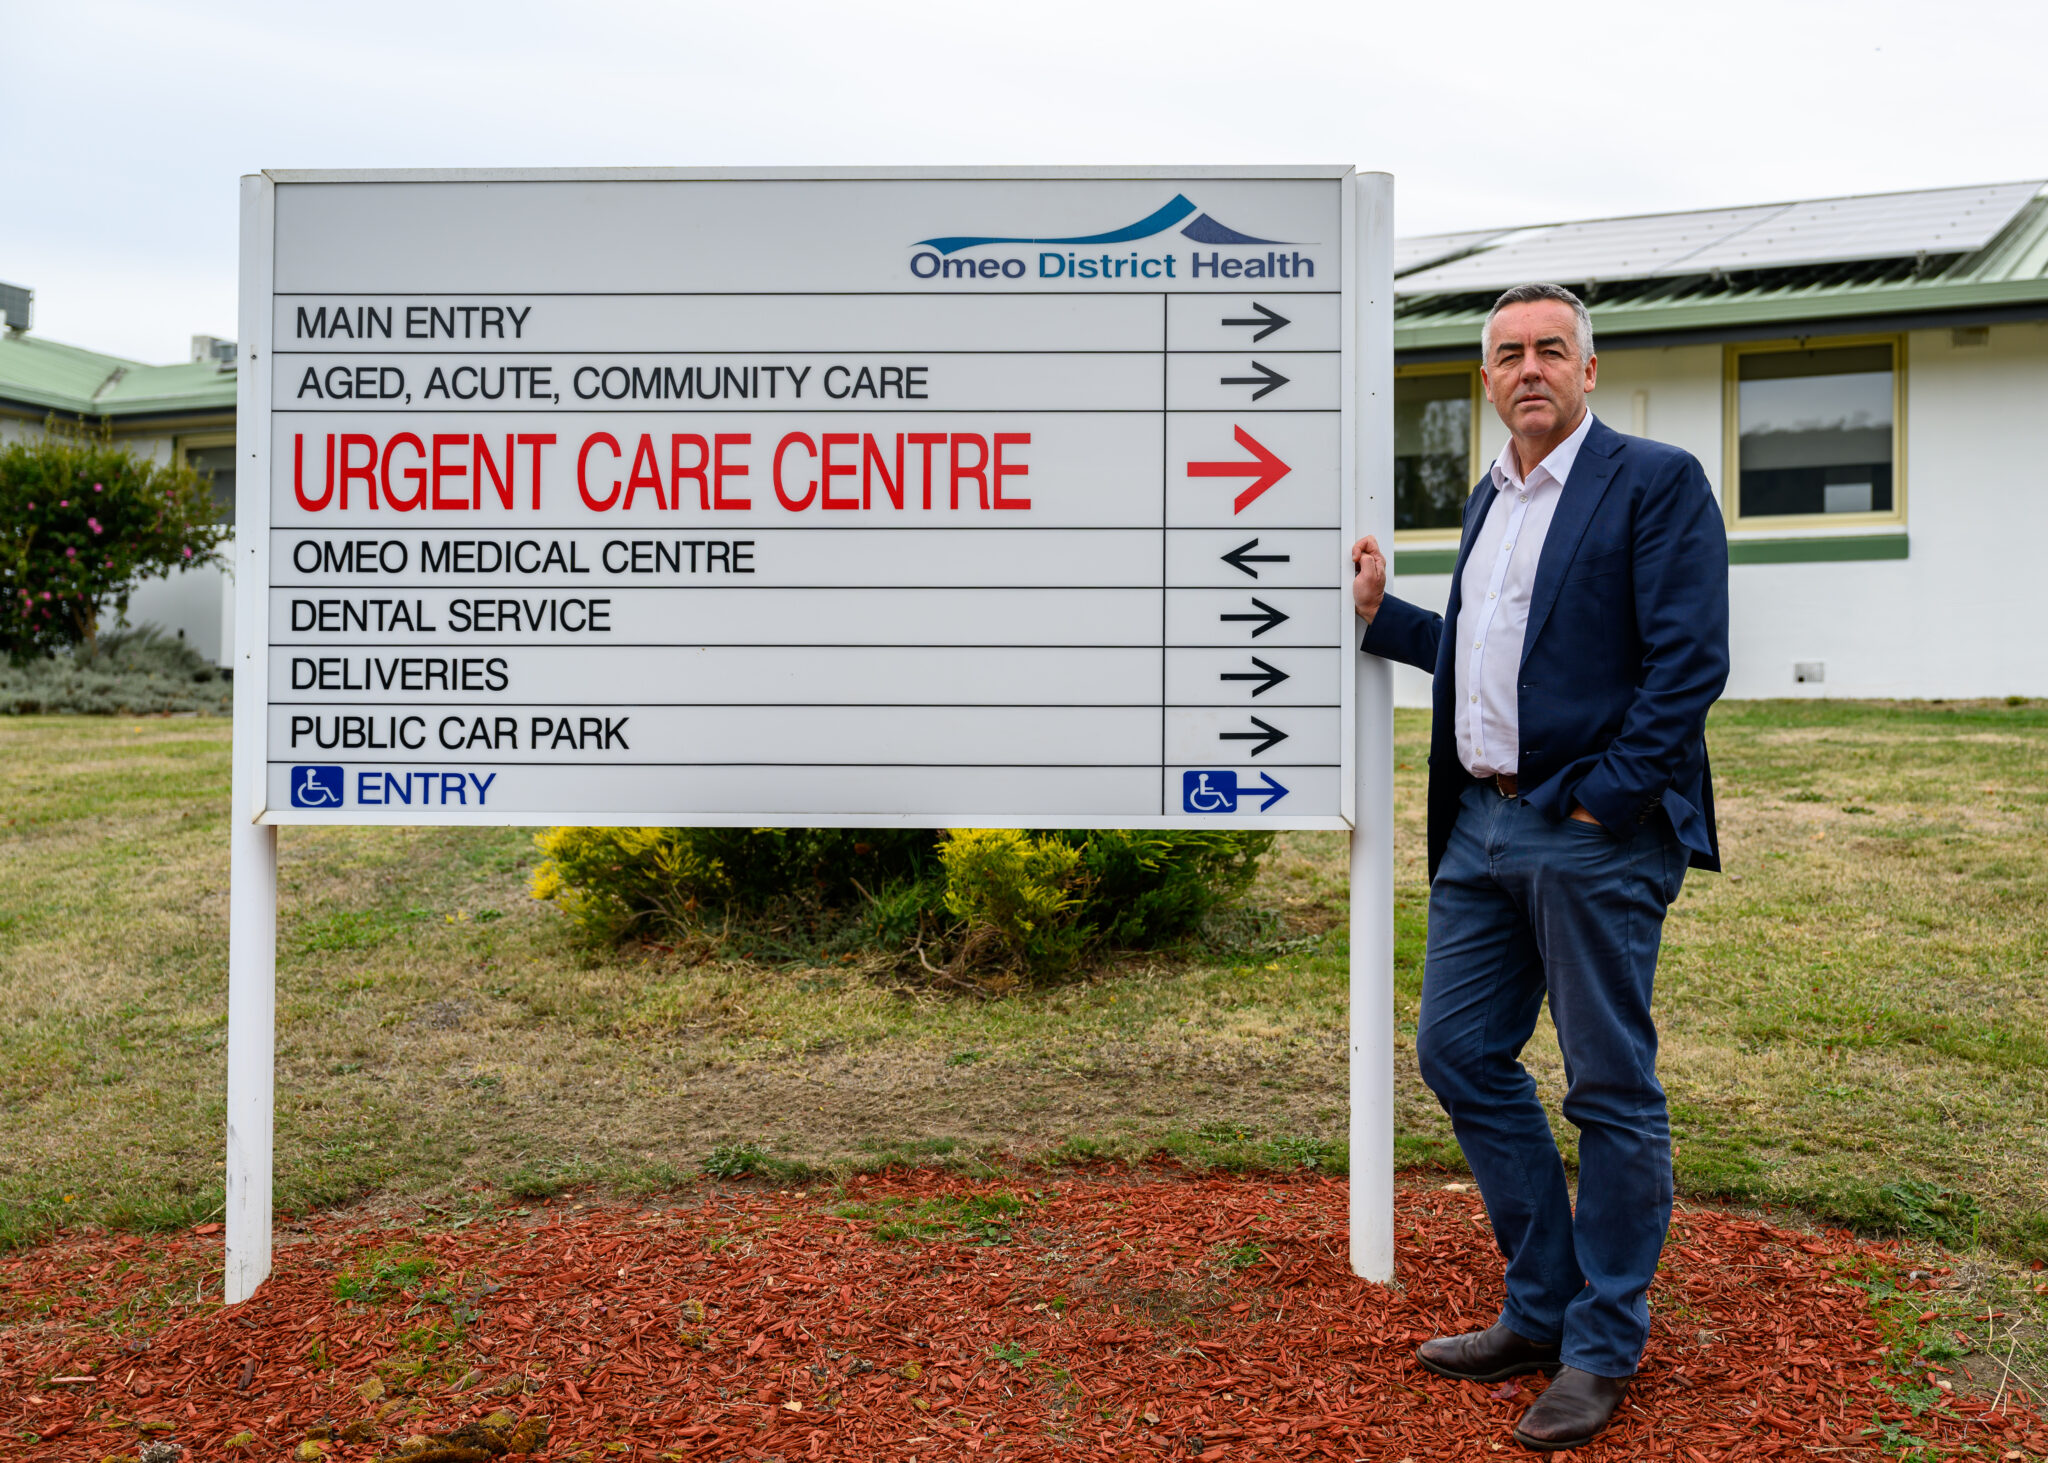 PRIME MINISTER URGED TO BLOCK HOSPITAL MERGERS